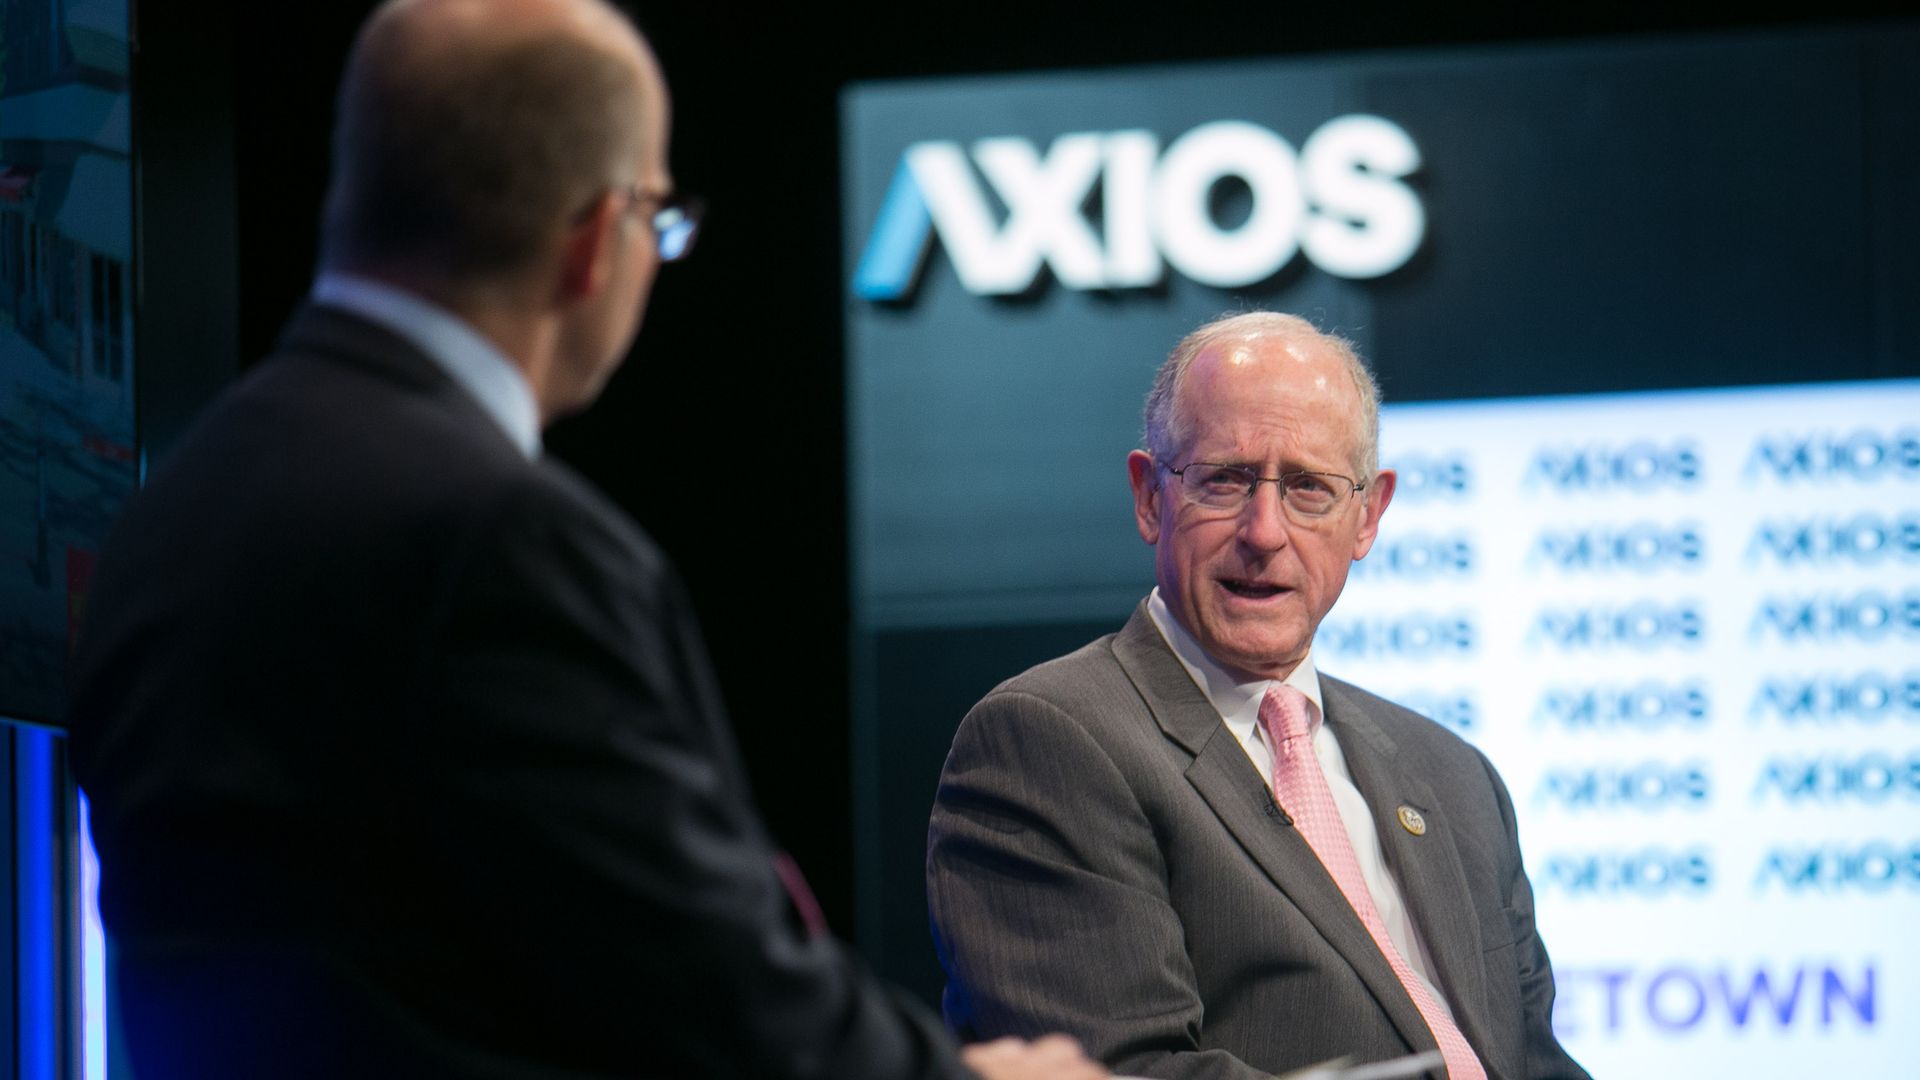 Rep. Mike Conaway at an Axios event